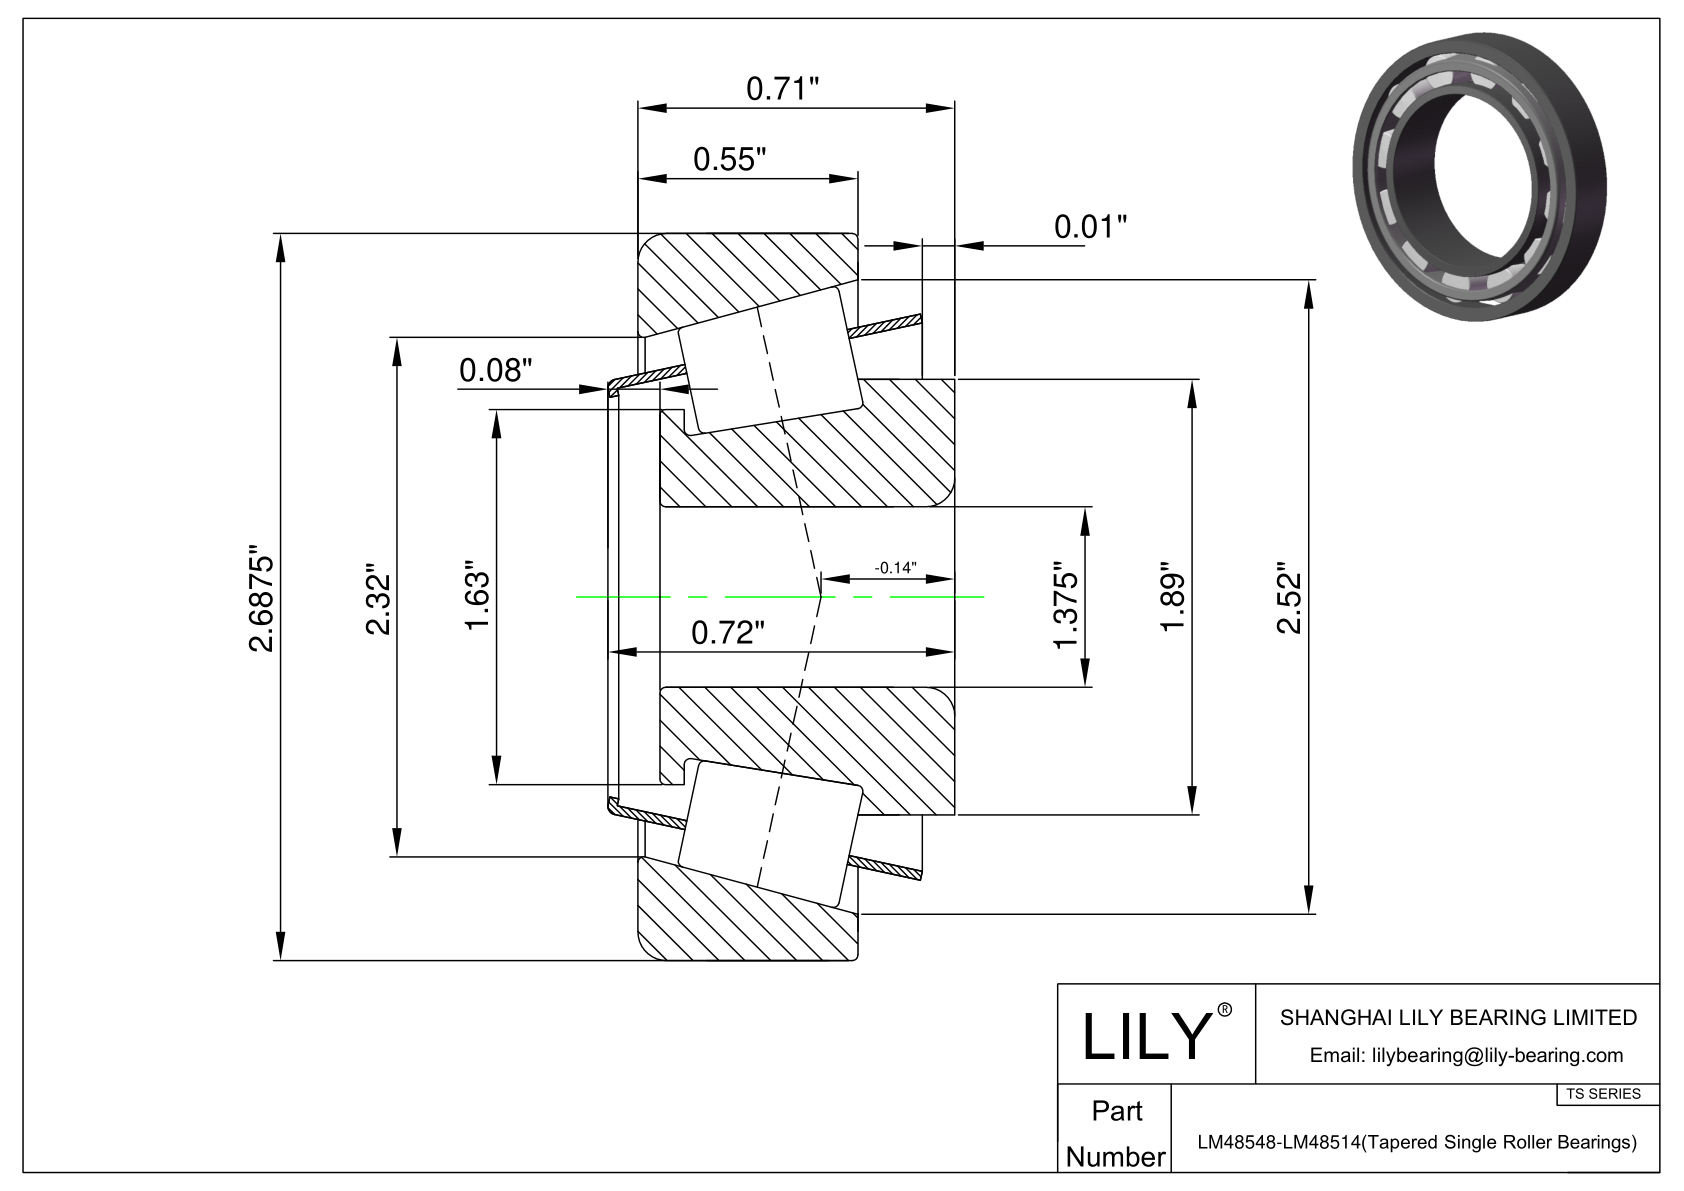 LM48548-LM48514 TS (Tapered Single Roller Bearings) (Imperial) cad drawing